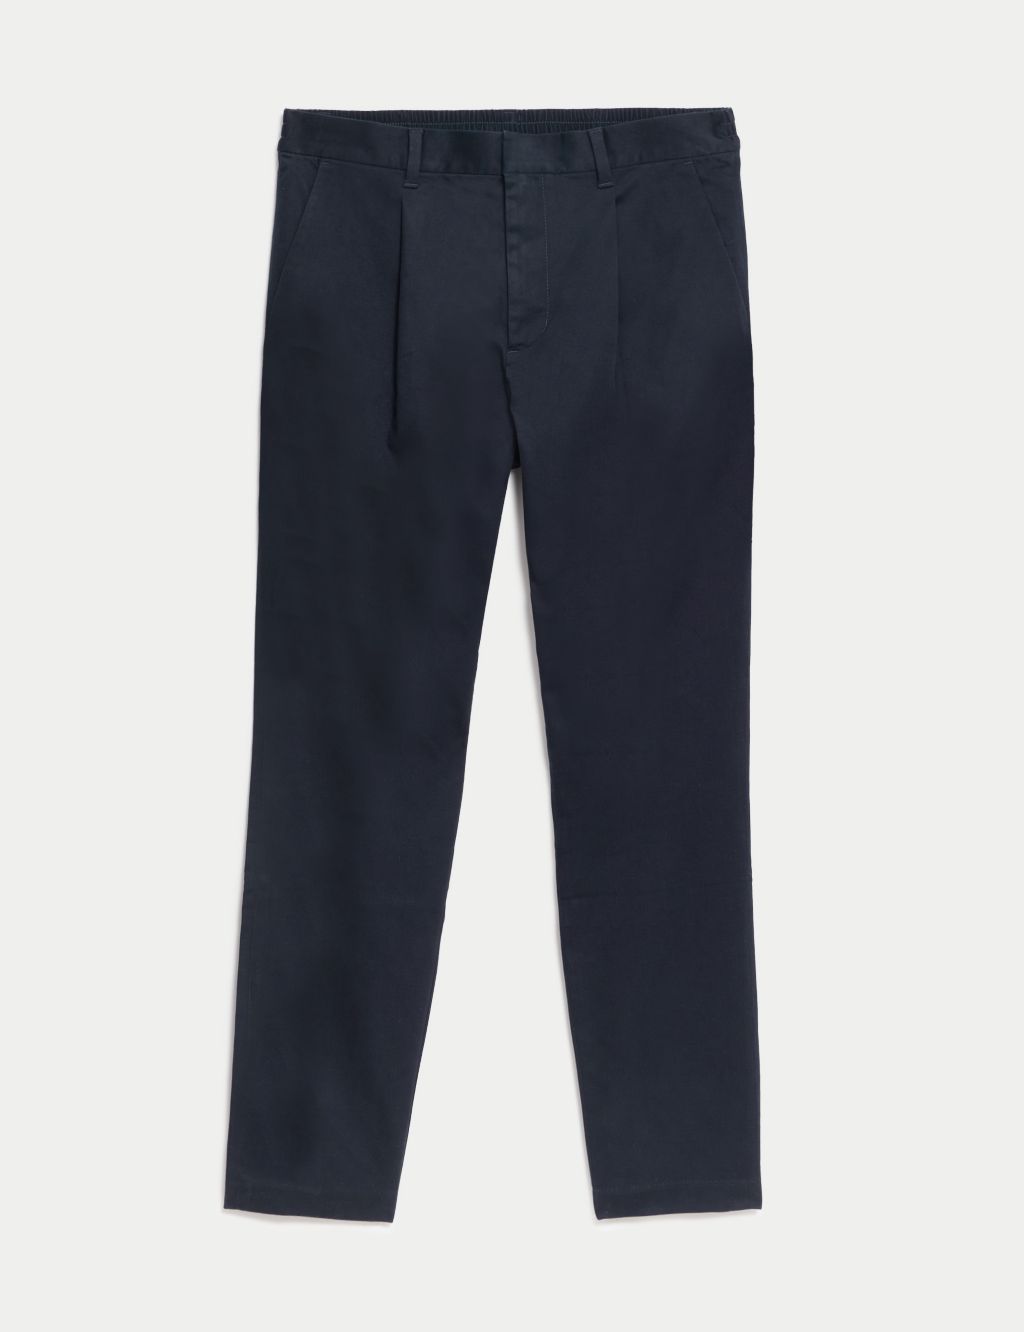 Tapered Fit Half-Elasticated Waist Chinos image 1